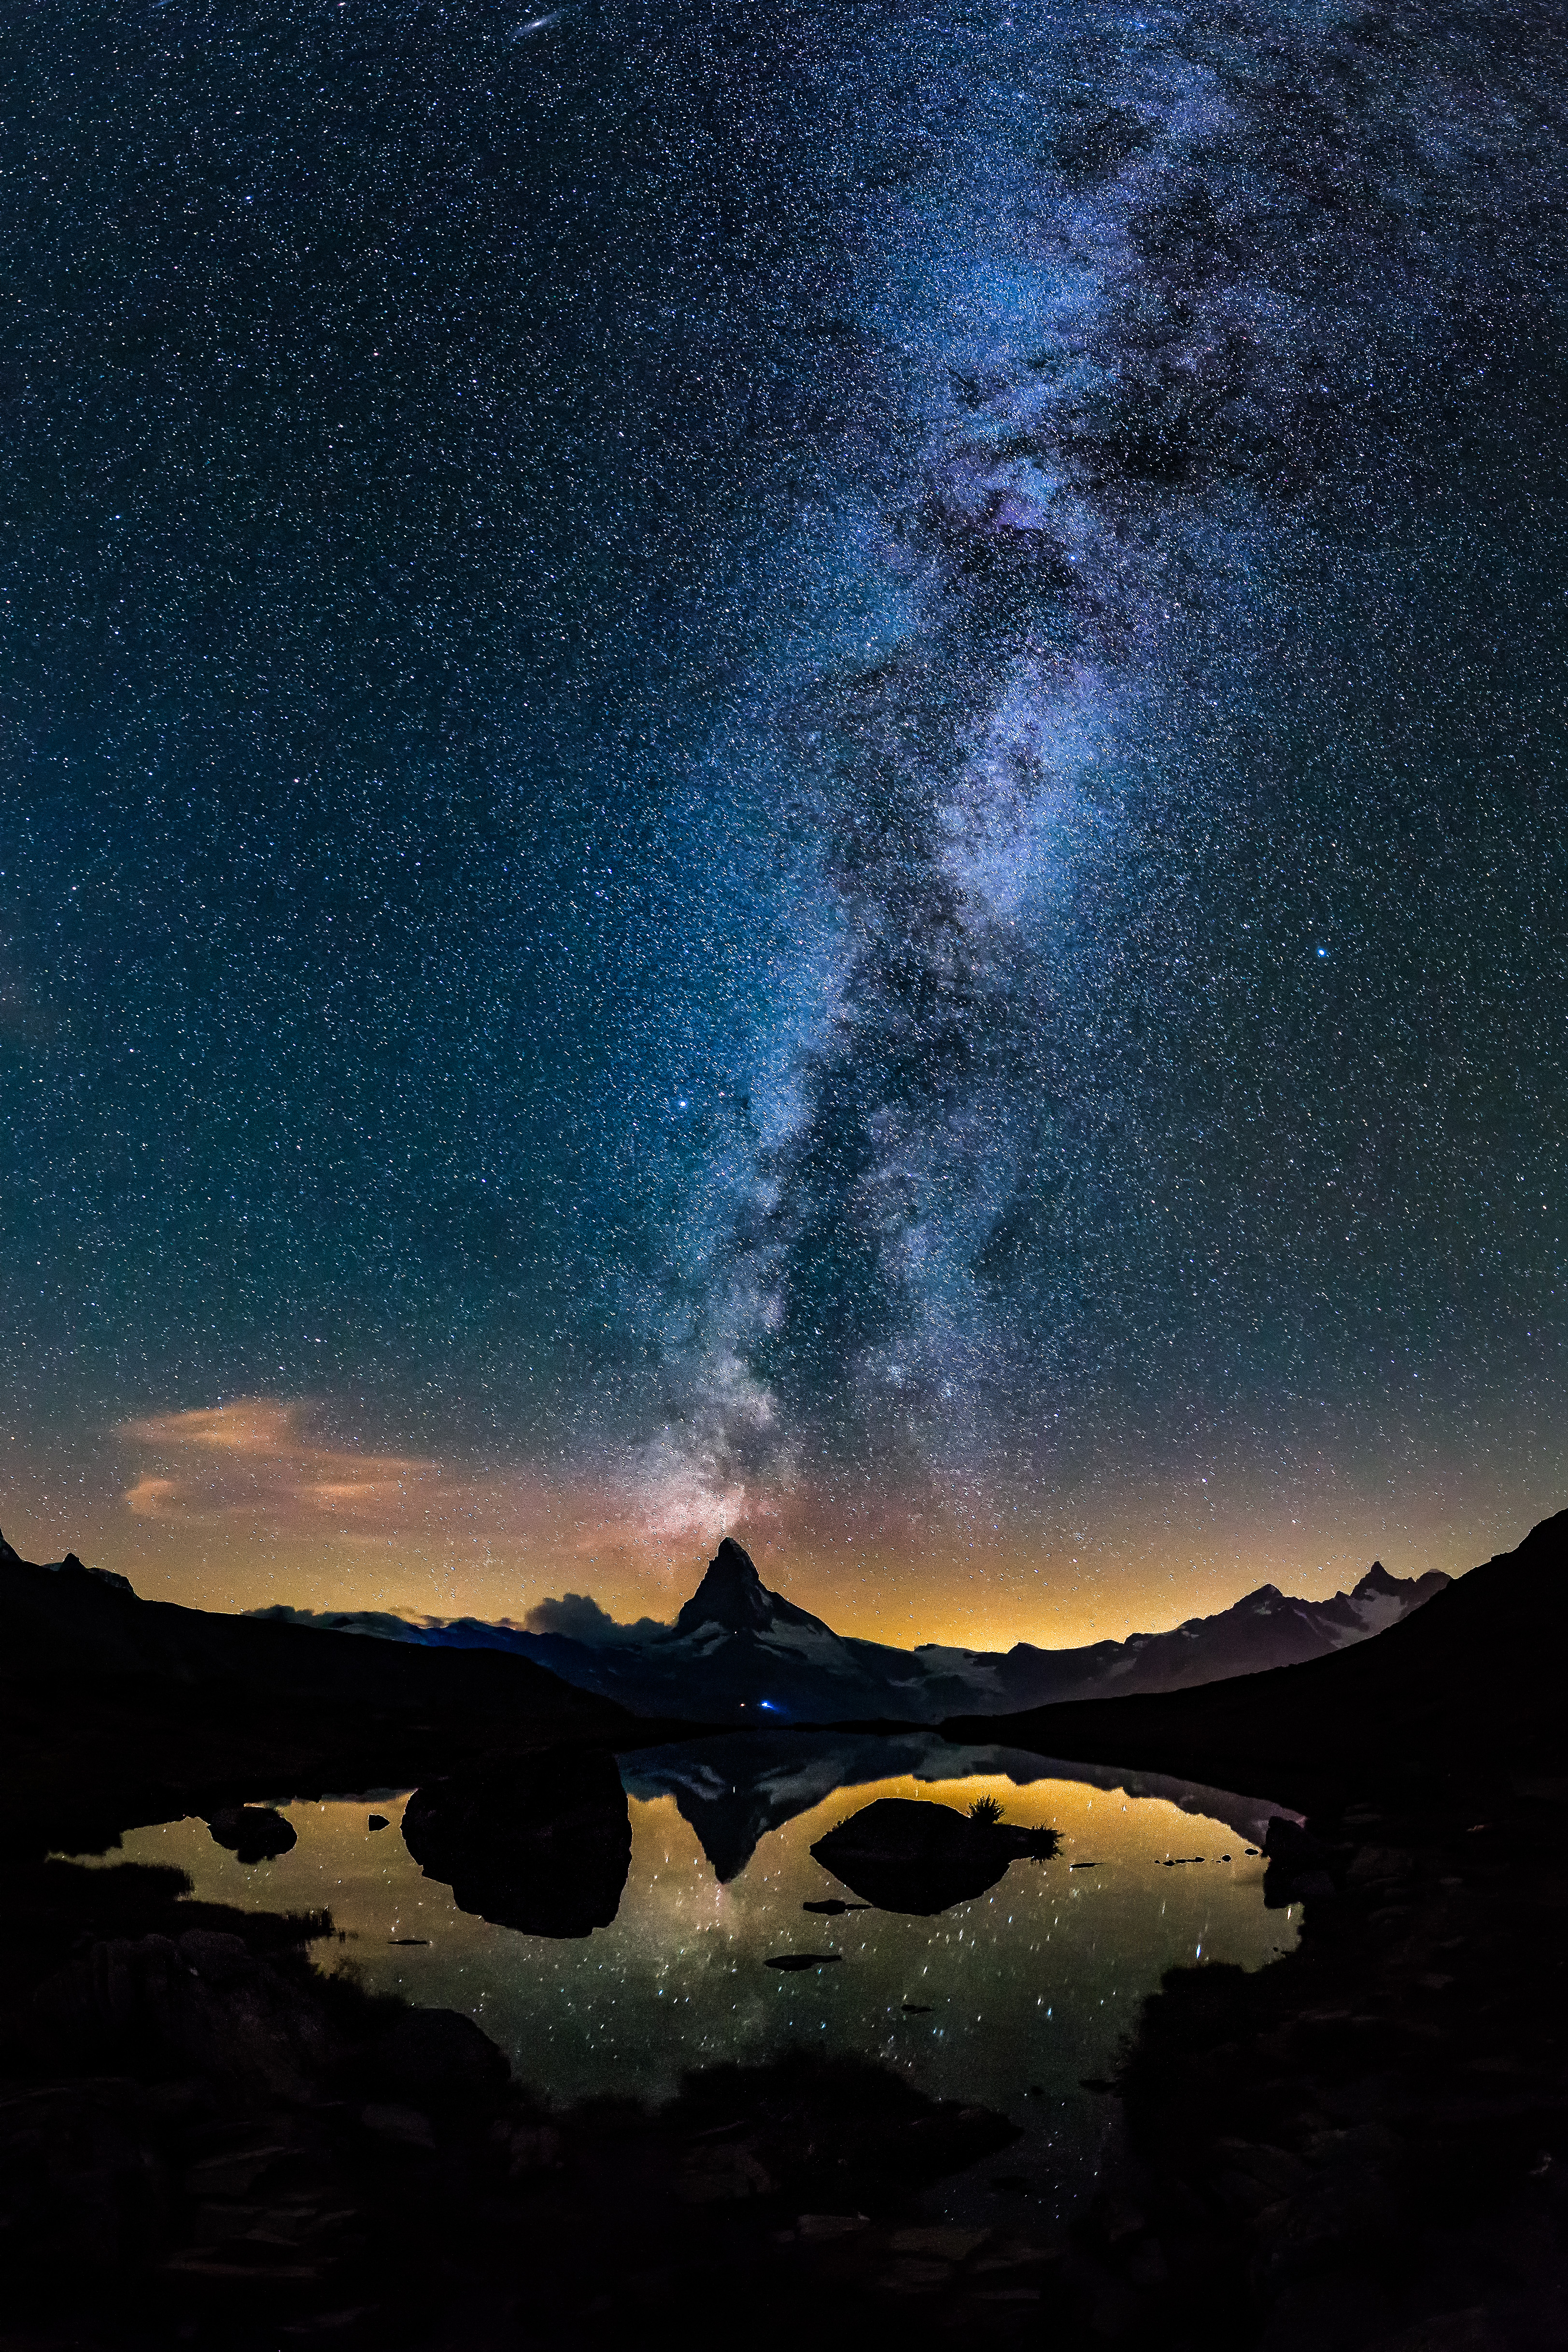 vertical wallpaper universe, nature, mountains, lake, starry sky